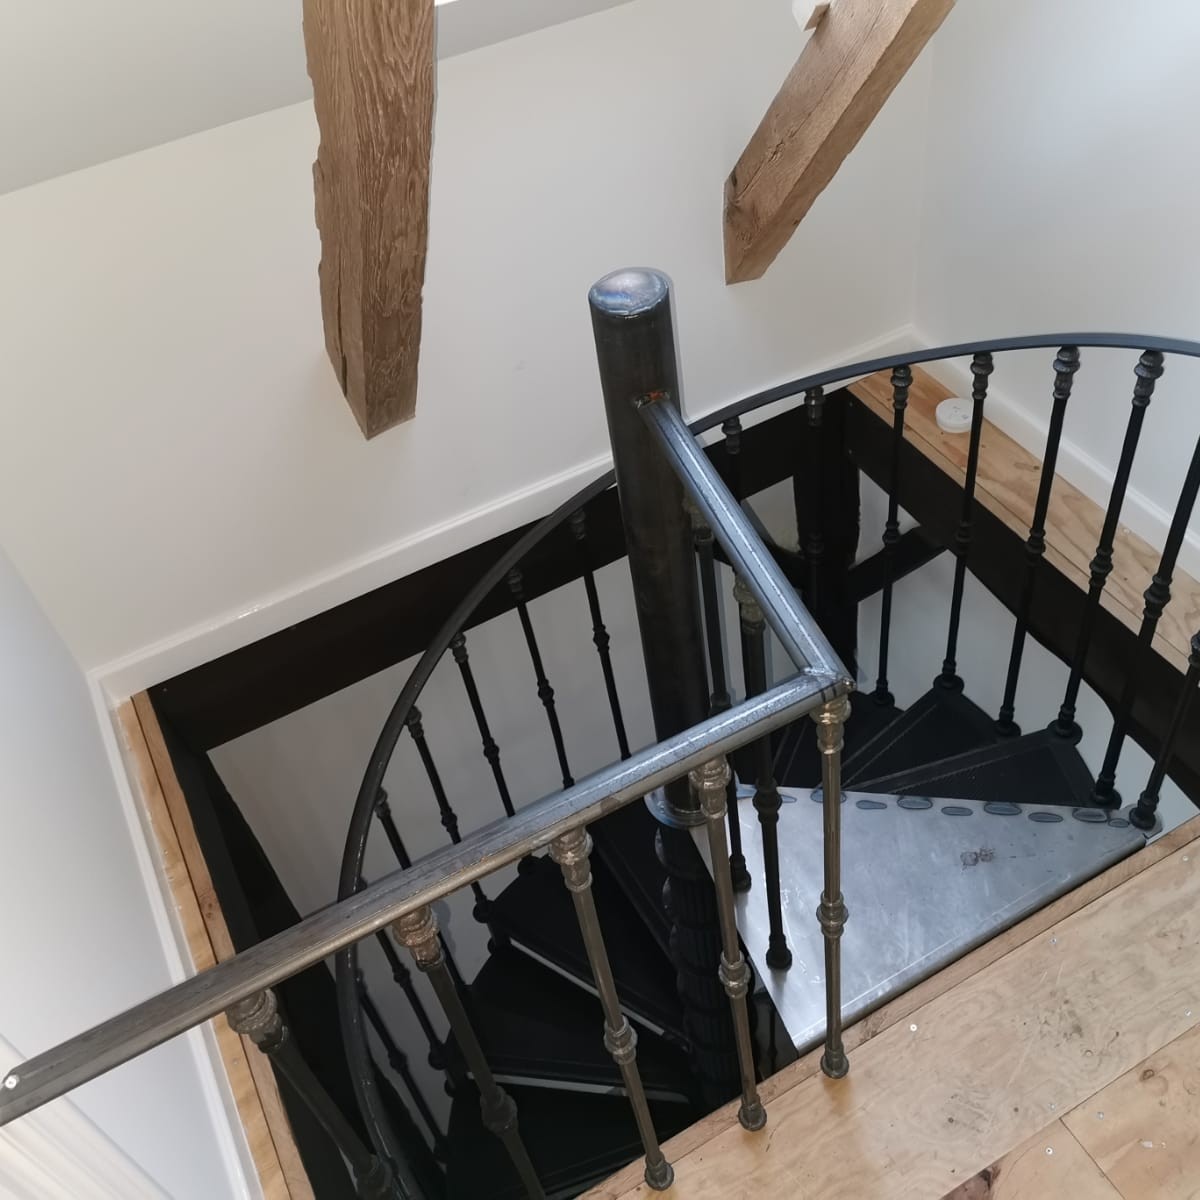 Cast iron spiral staircase model Reims in a smaller stairwell (with a triangular landing)